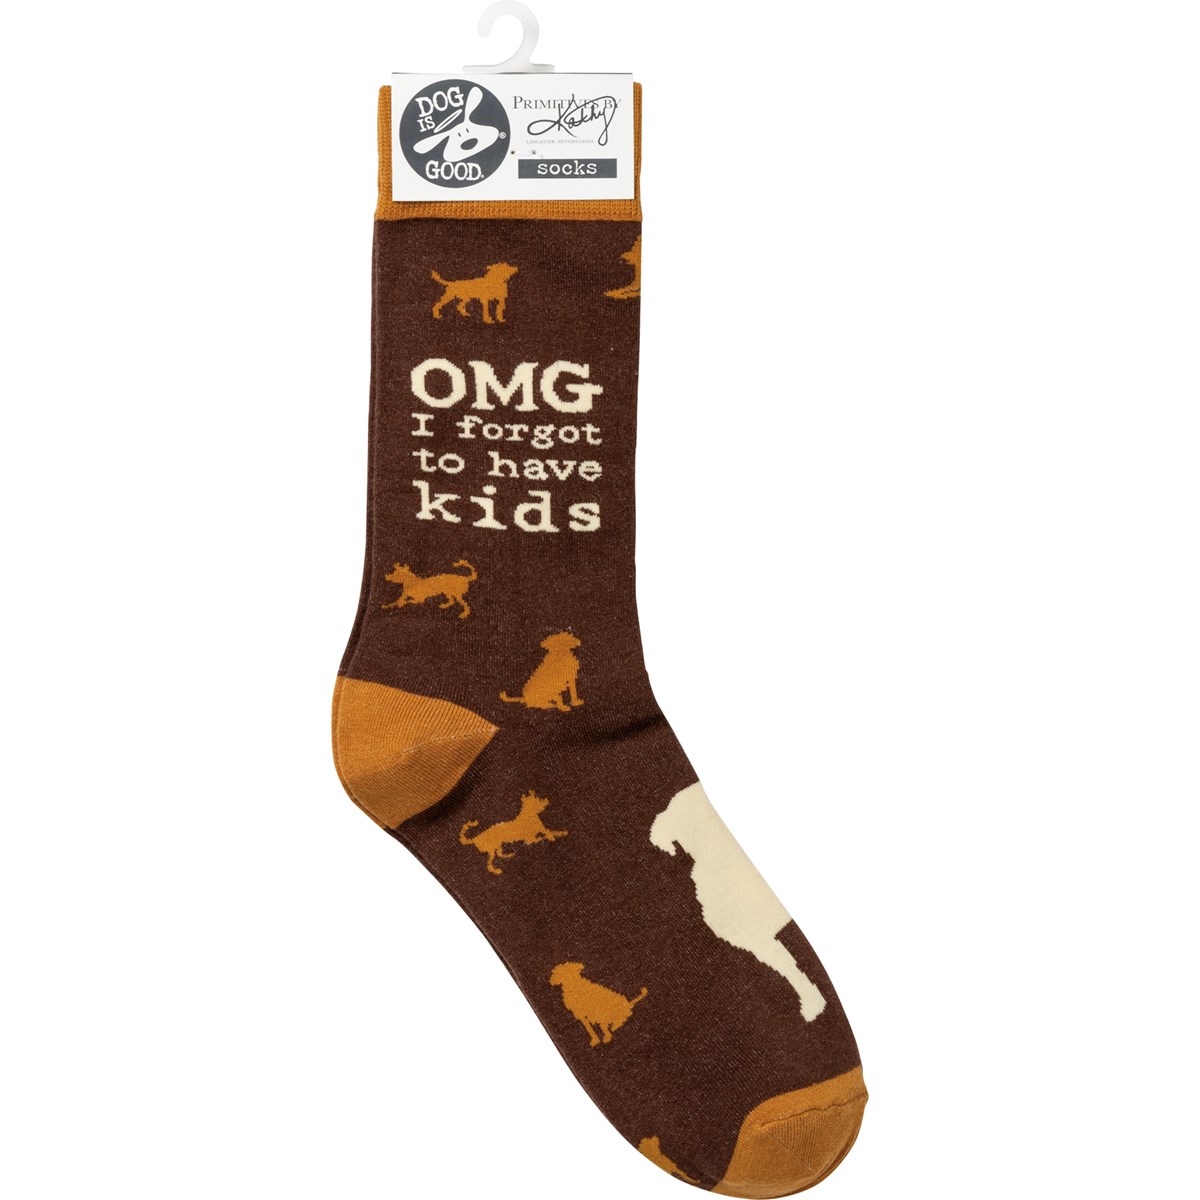 Socks - Forgot To Have Kids - One Size Fits Most - Cotton, Nylon, Spandex